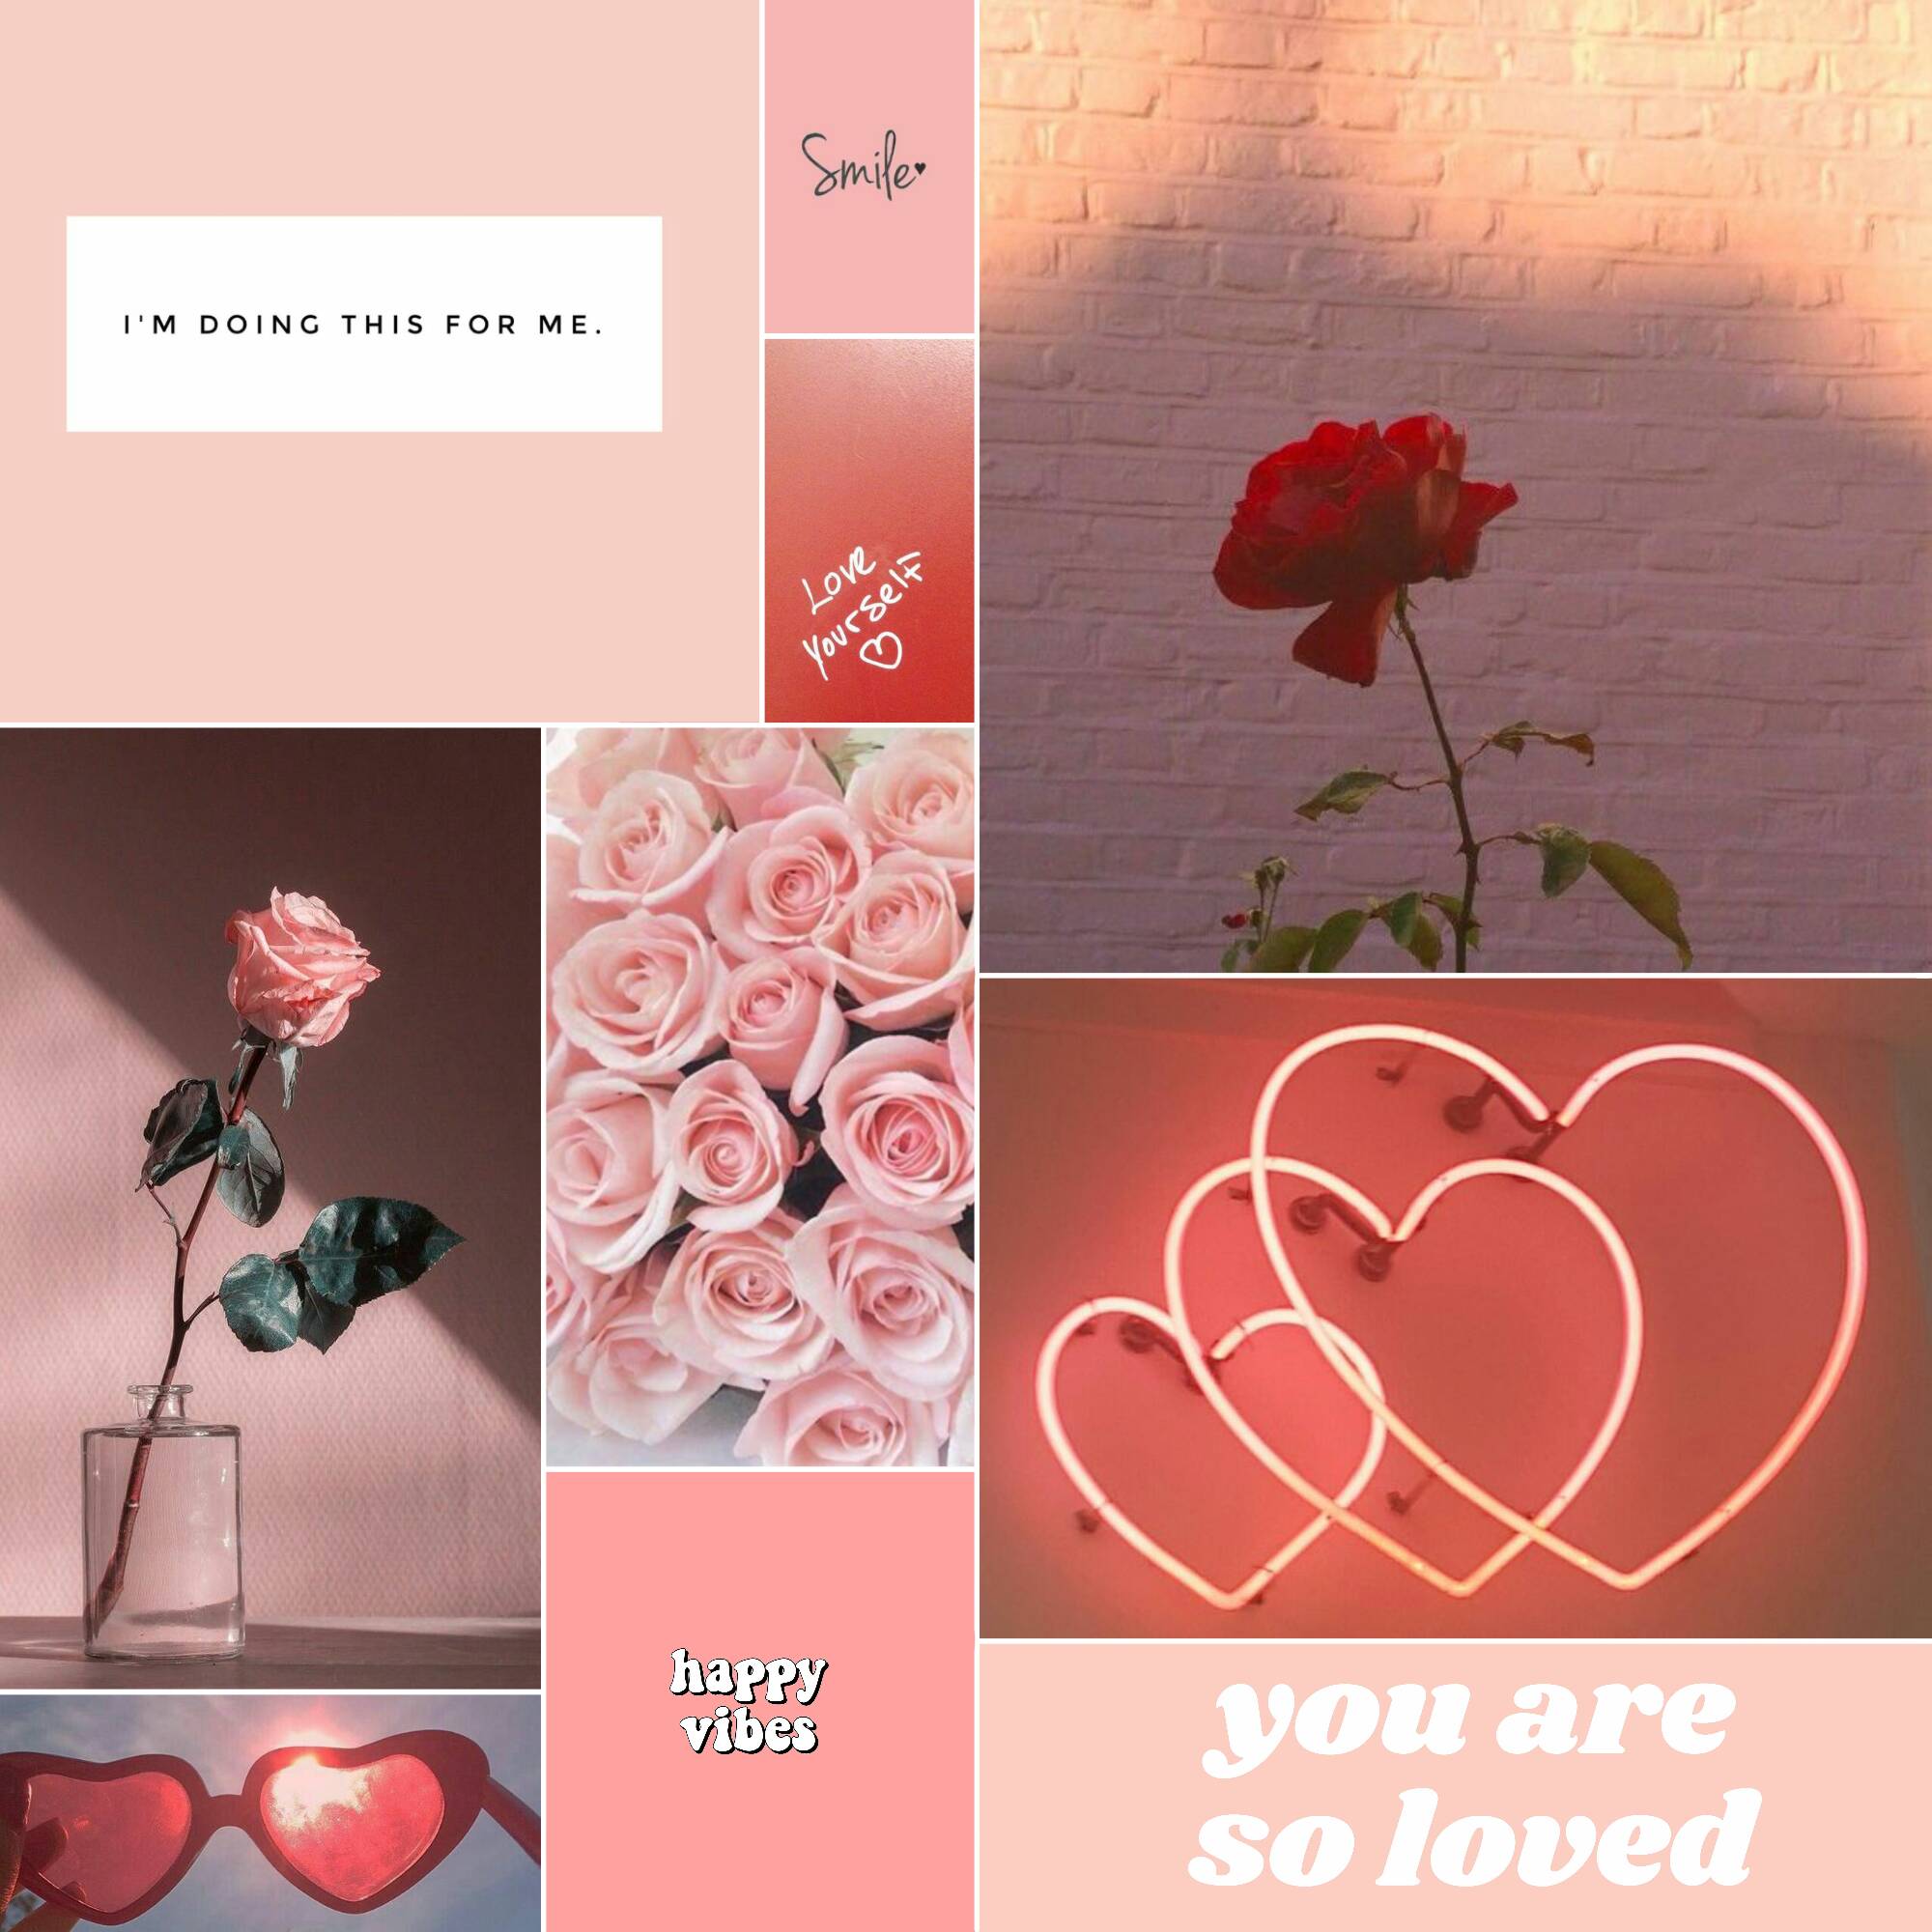 Happy Vibes (Pink + red aesthetic) by IdiotSynergy on DeviantArt